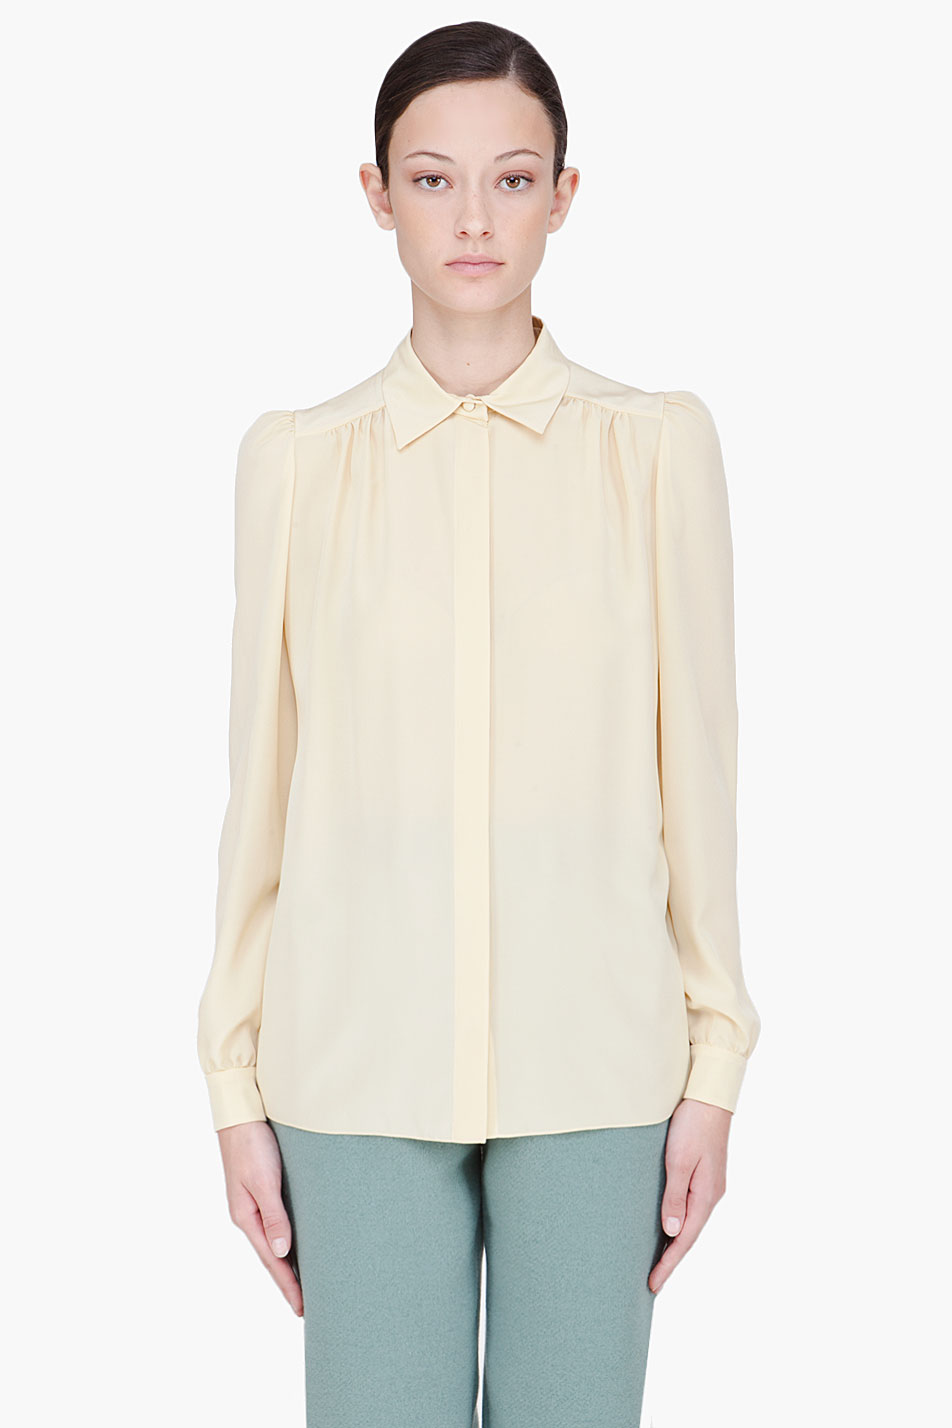 Lyst - Chloé Pale Yellow Silk Blouse in Yellow